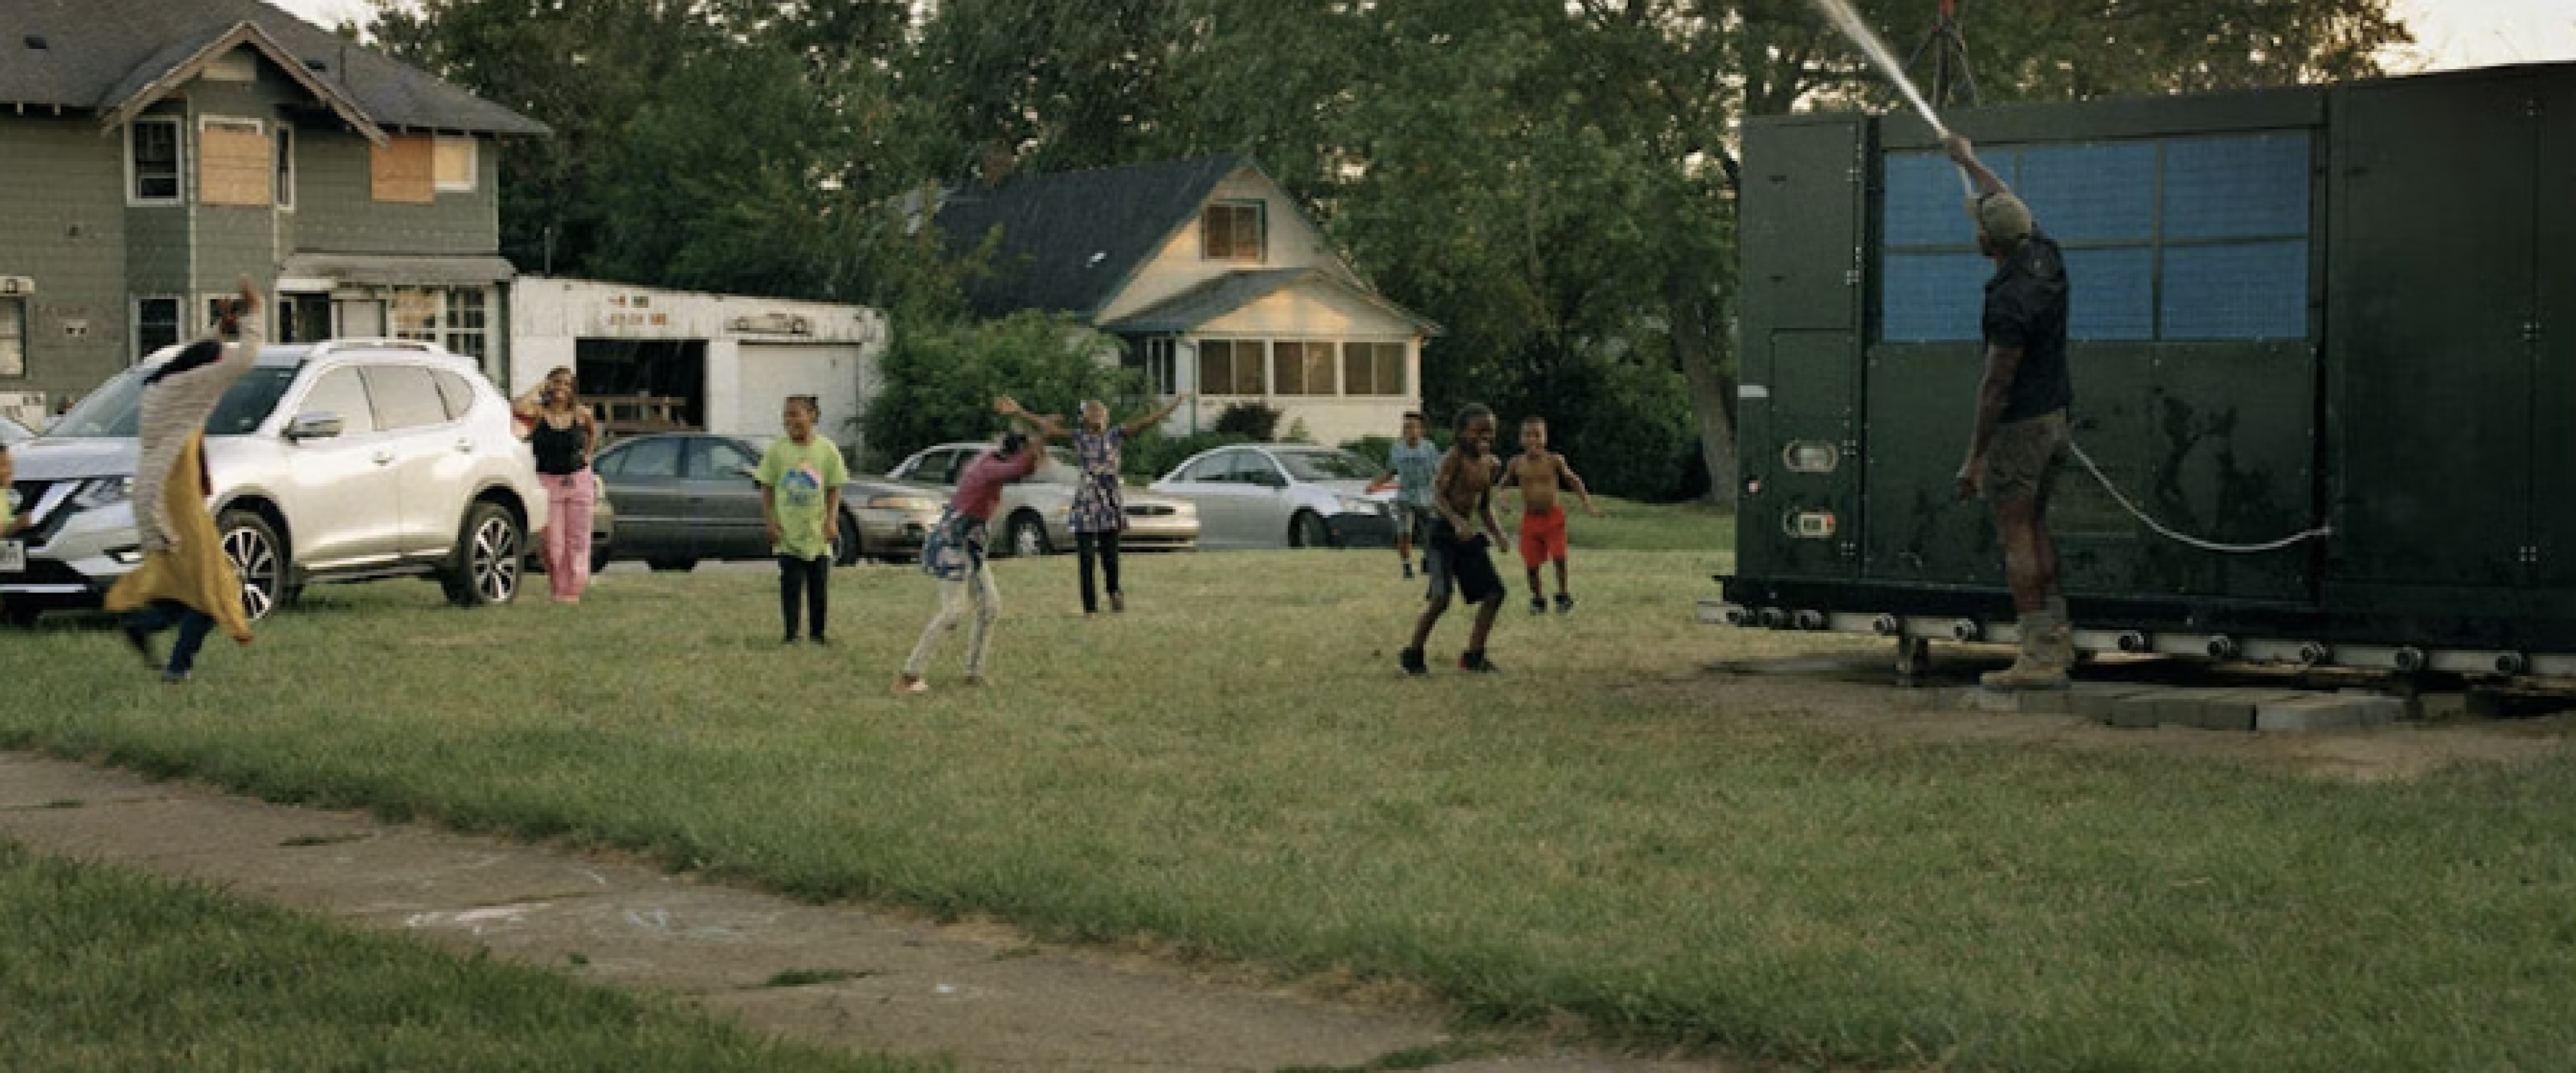 Photo of kids in the yard playing